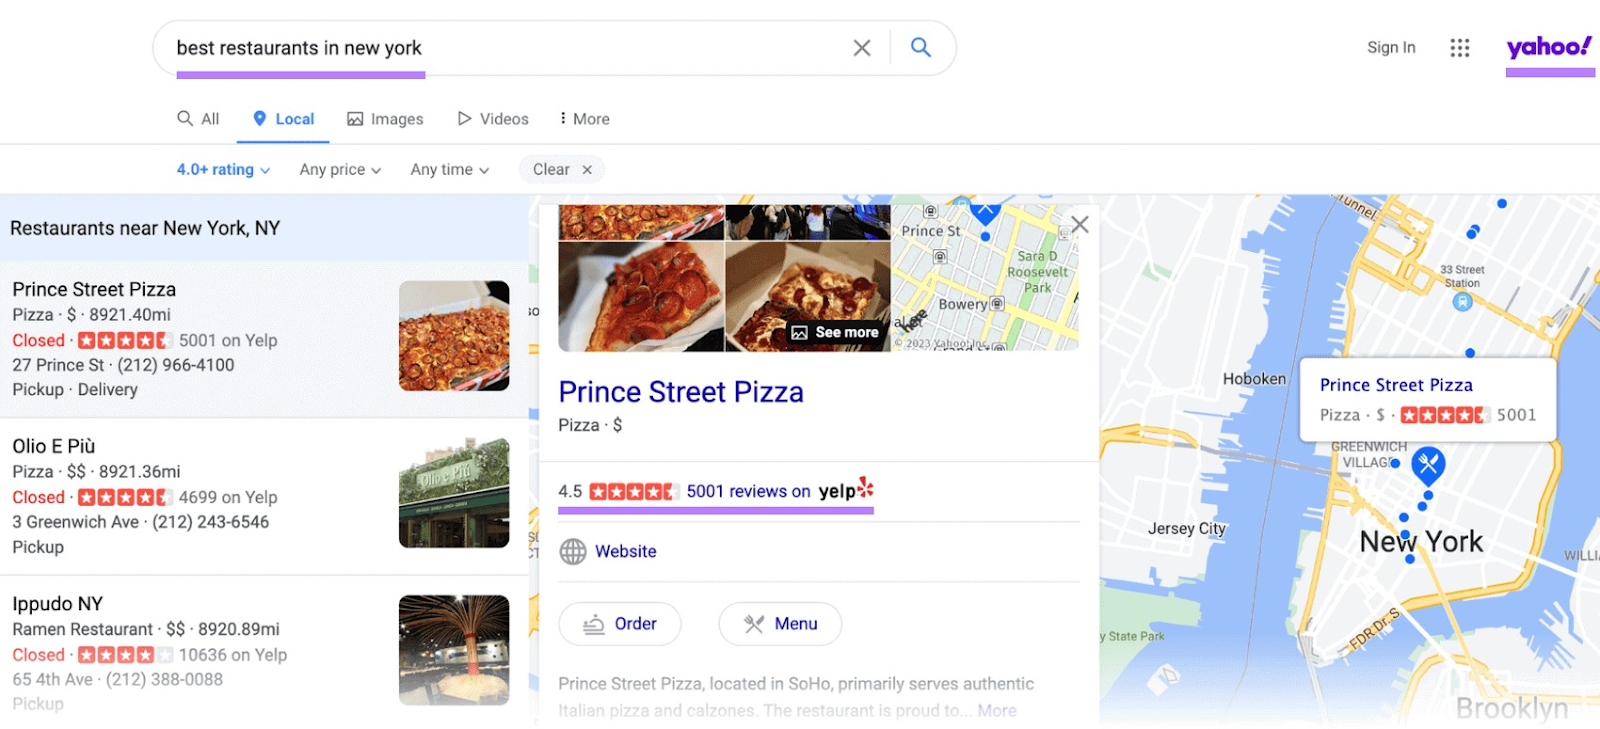 Yelp rating appears on Yahoo results for "best restaurants in new york"